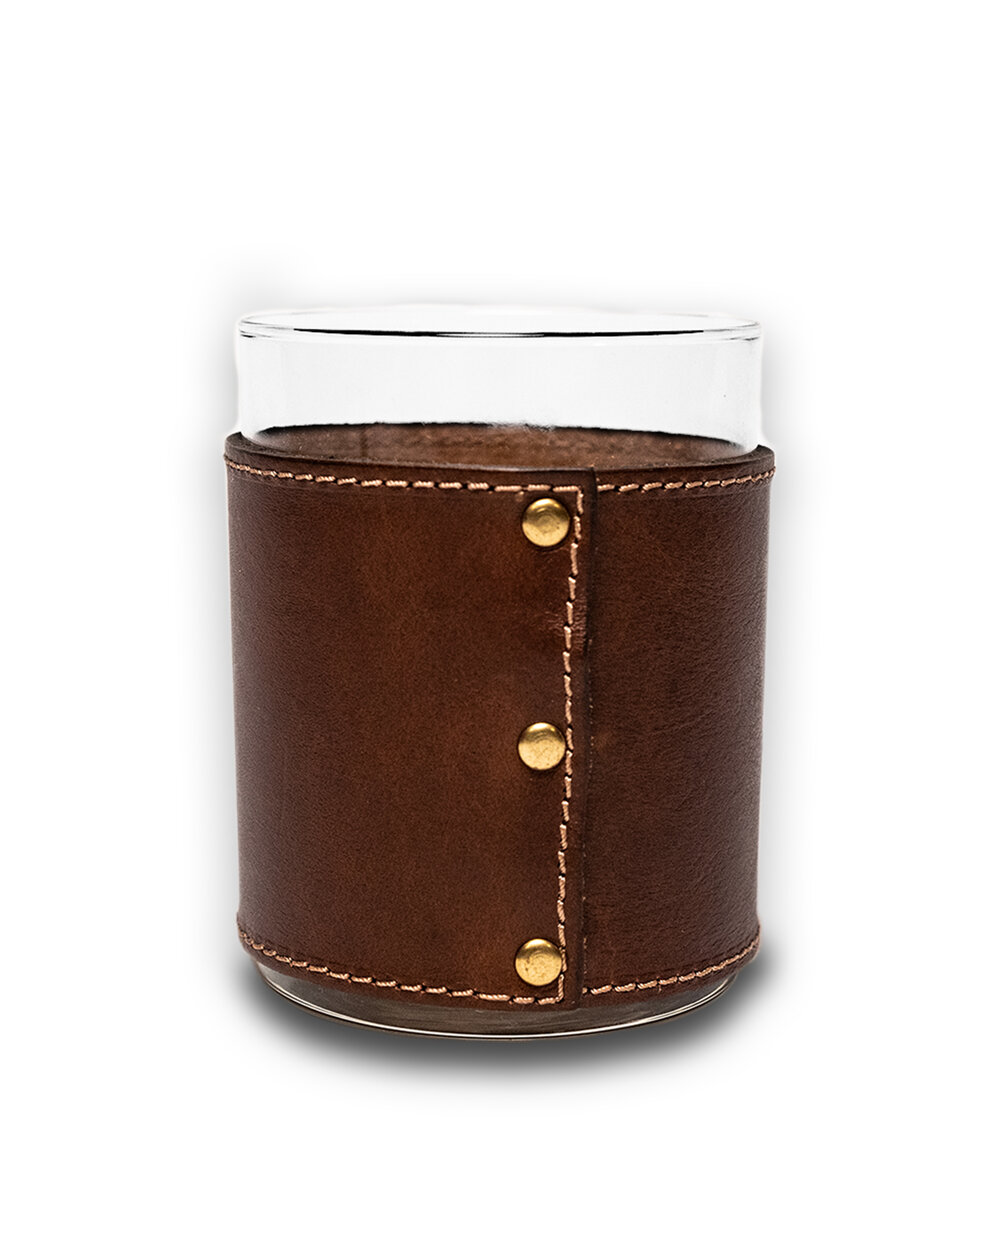 Blanton's Handmade Set of Leather Wrapped Whiskey Glasses with Gift Box —  The Official Blanton's Bourbon Shop